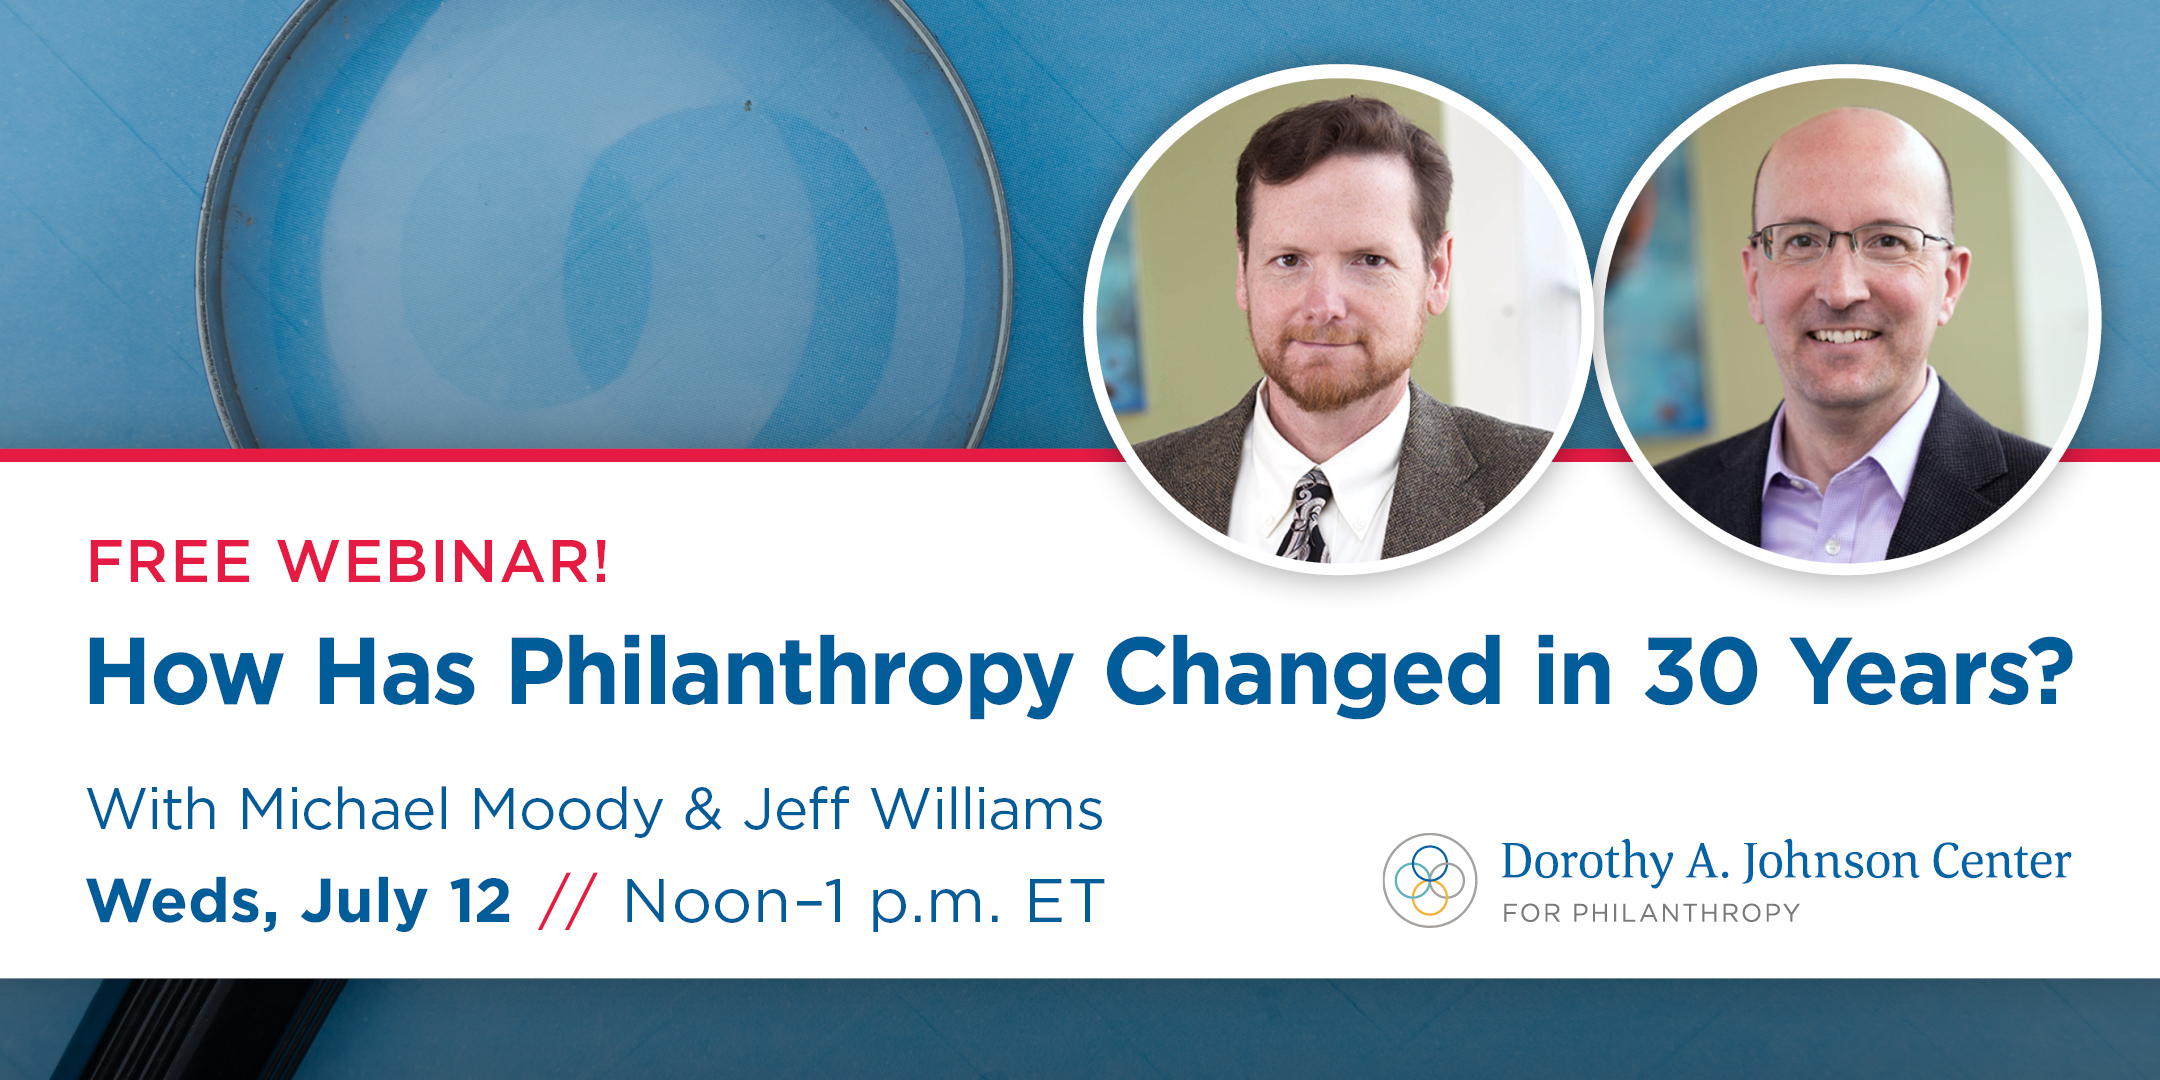 How Has Philanthropy Changed in 30 Years?